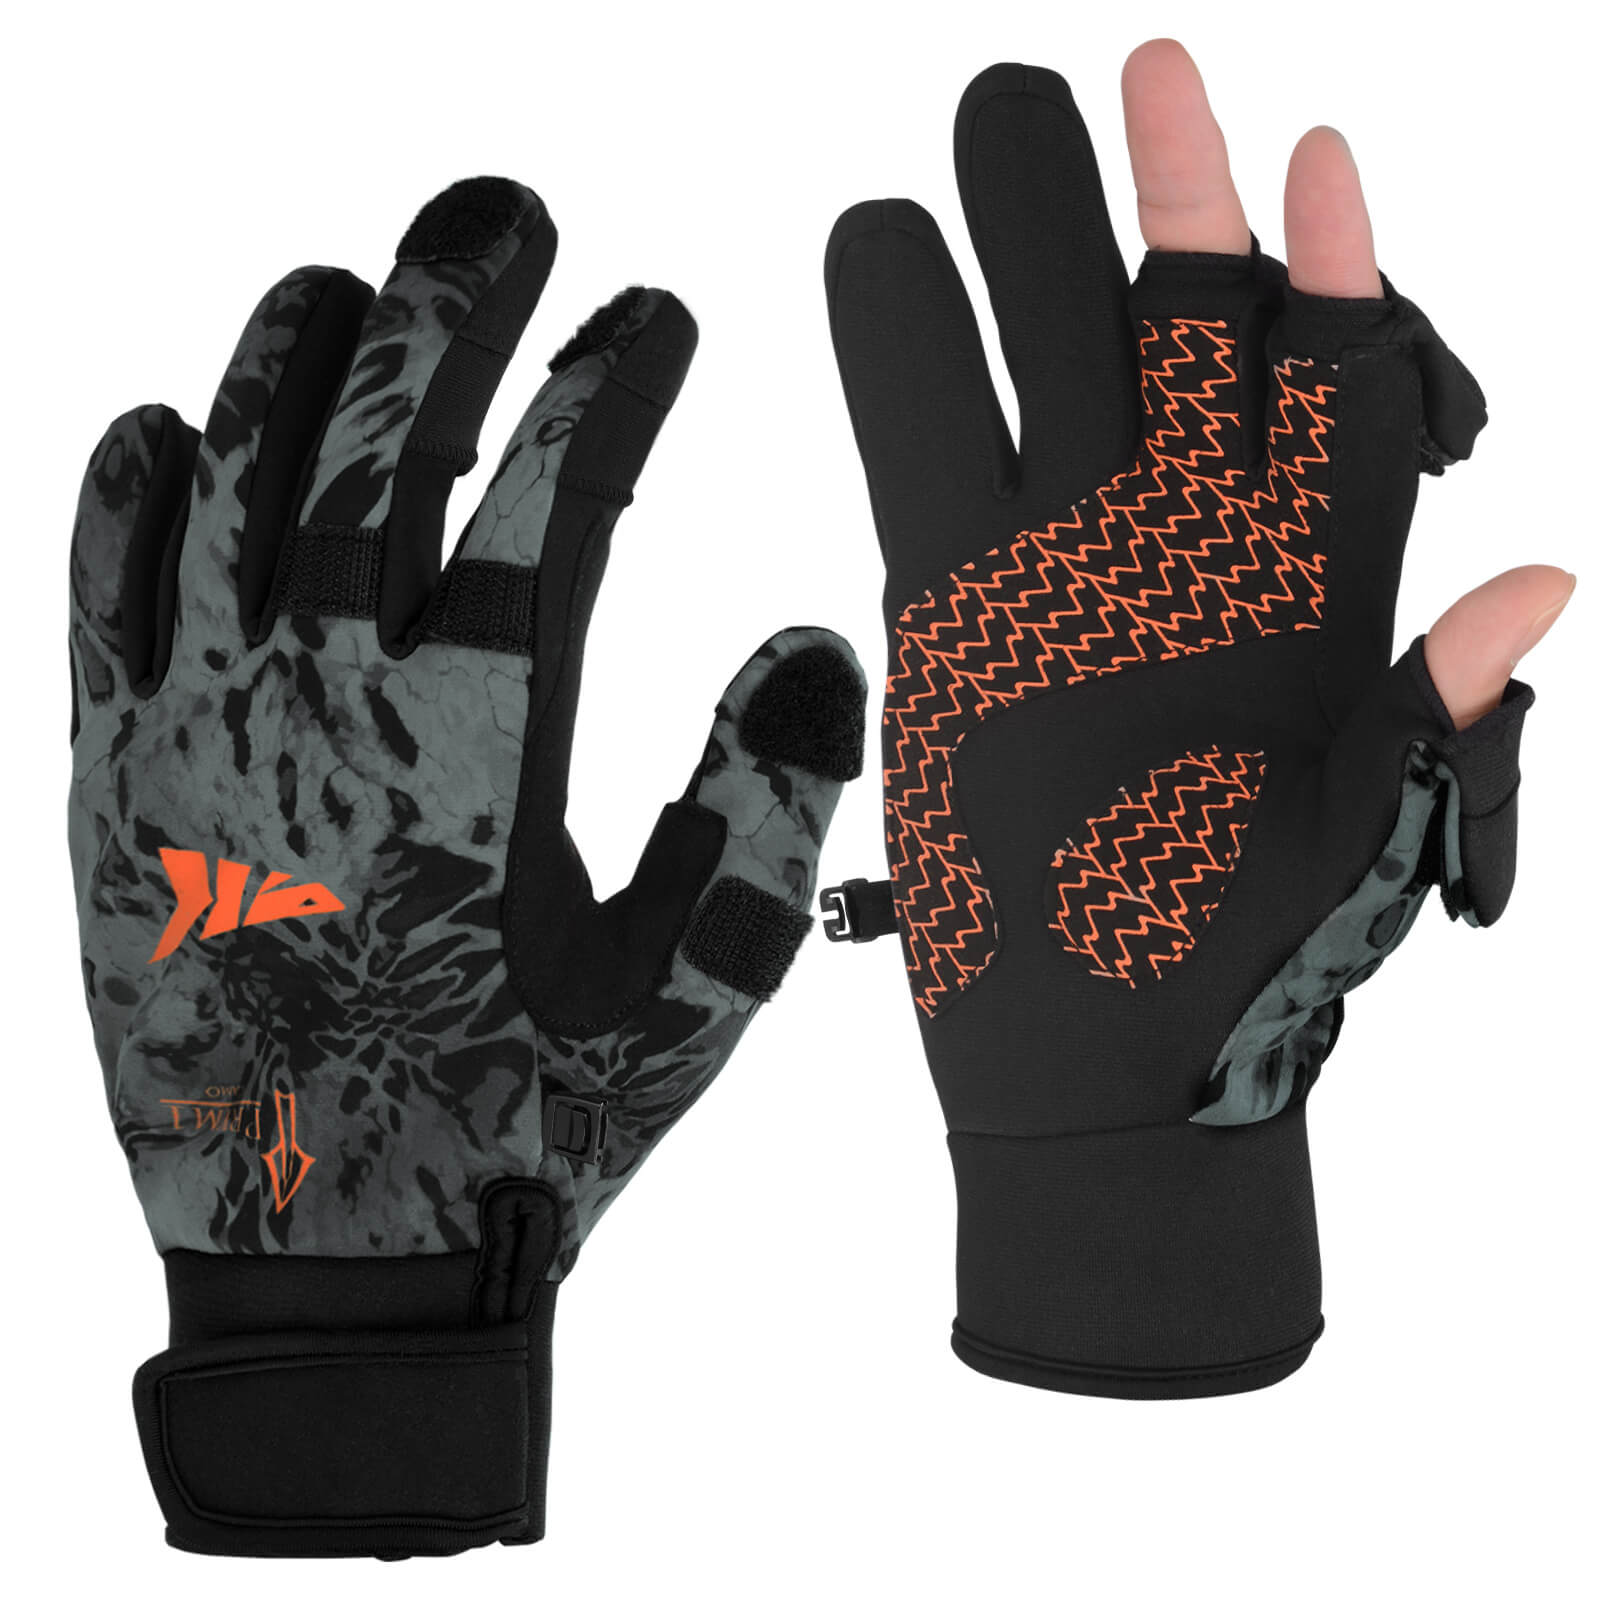 Page 11 - Buy Fishing Gloves Products Online at Best Prices in